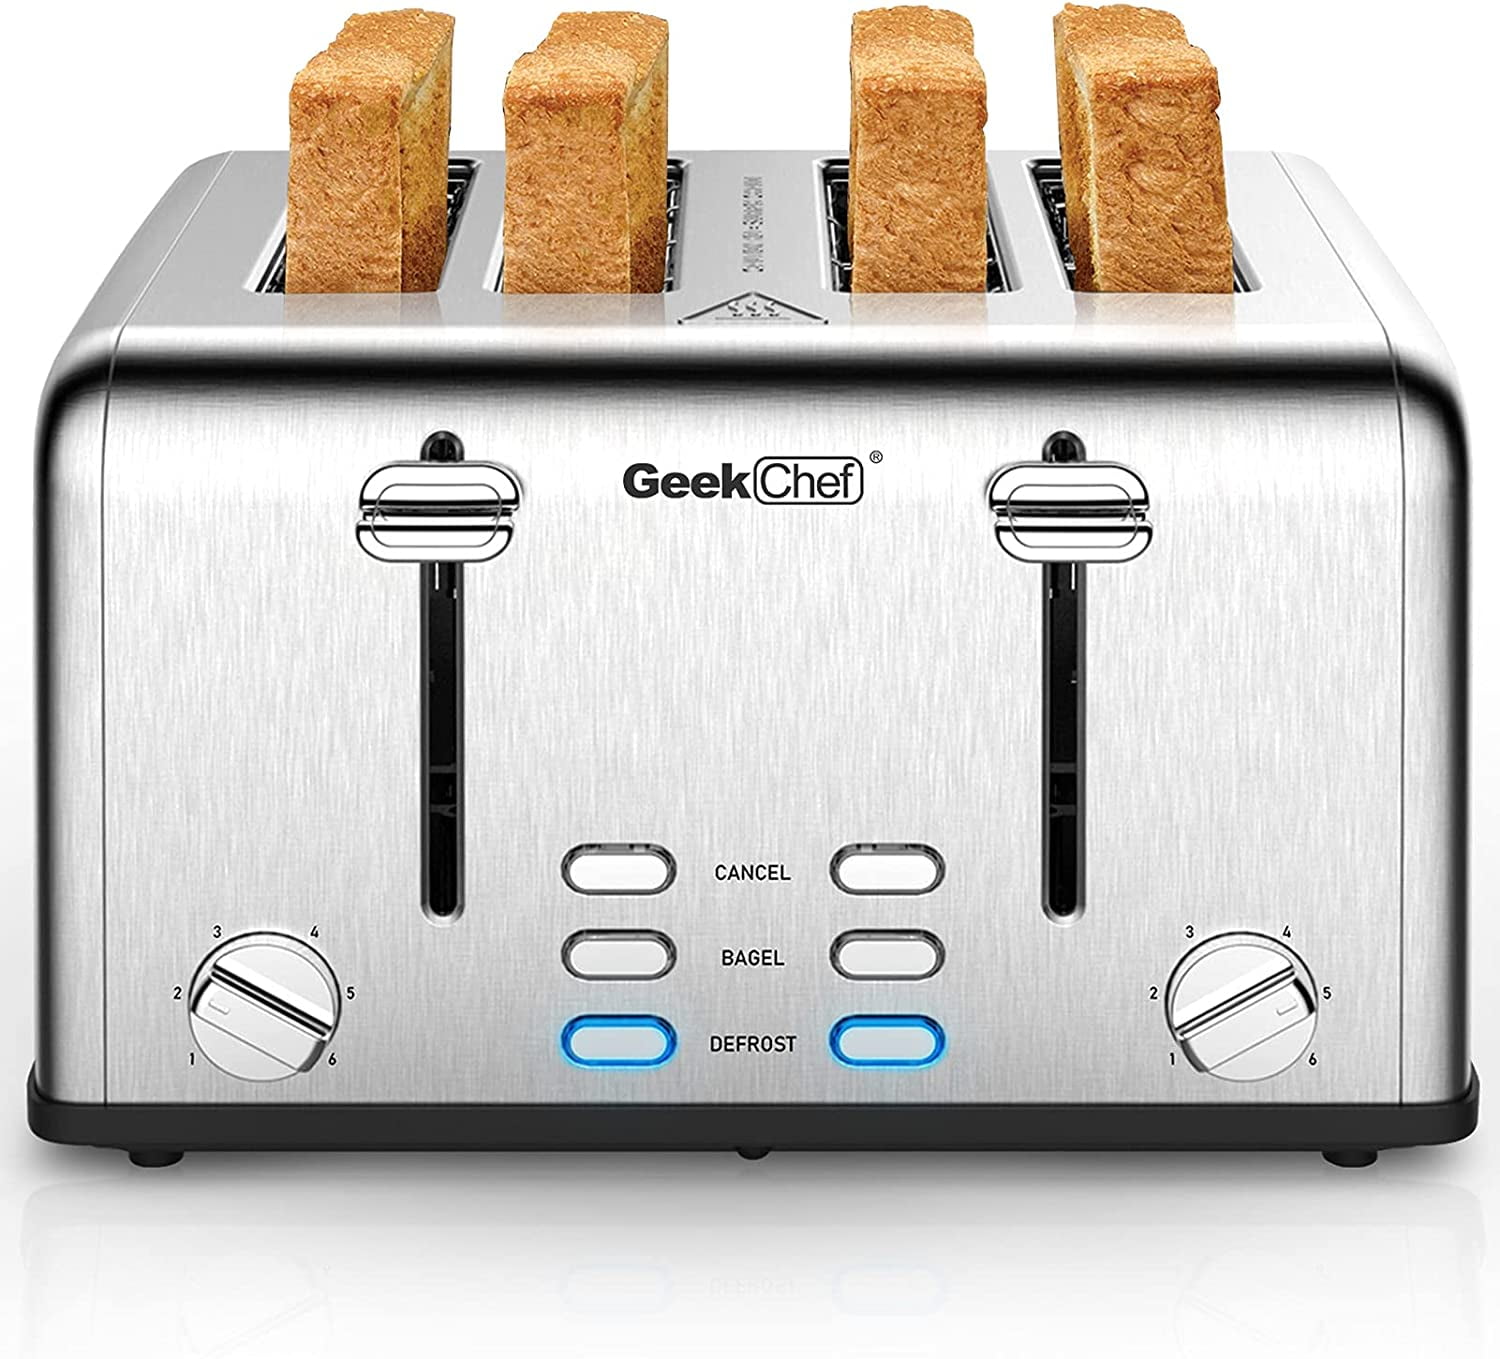 Long Slot Toaster 4 Slice Brushed Stainless Steel Toaster, 7 Toast Settings  with Bagel/Cancel/Defrost Functions, Toaster Warming Rack&Removable Tray